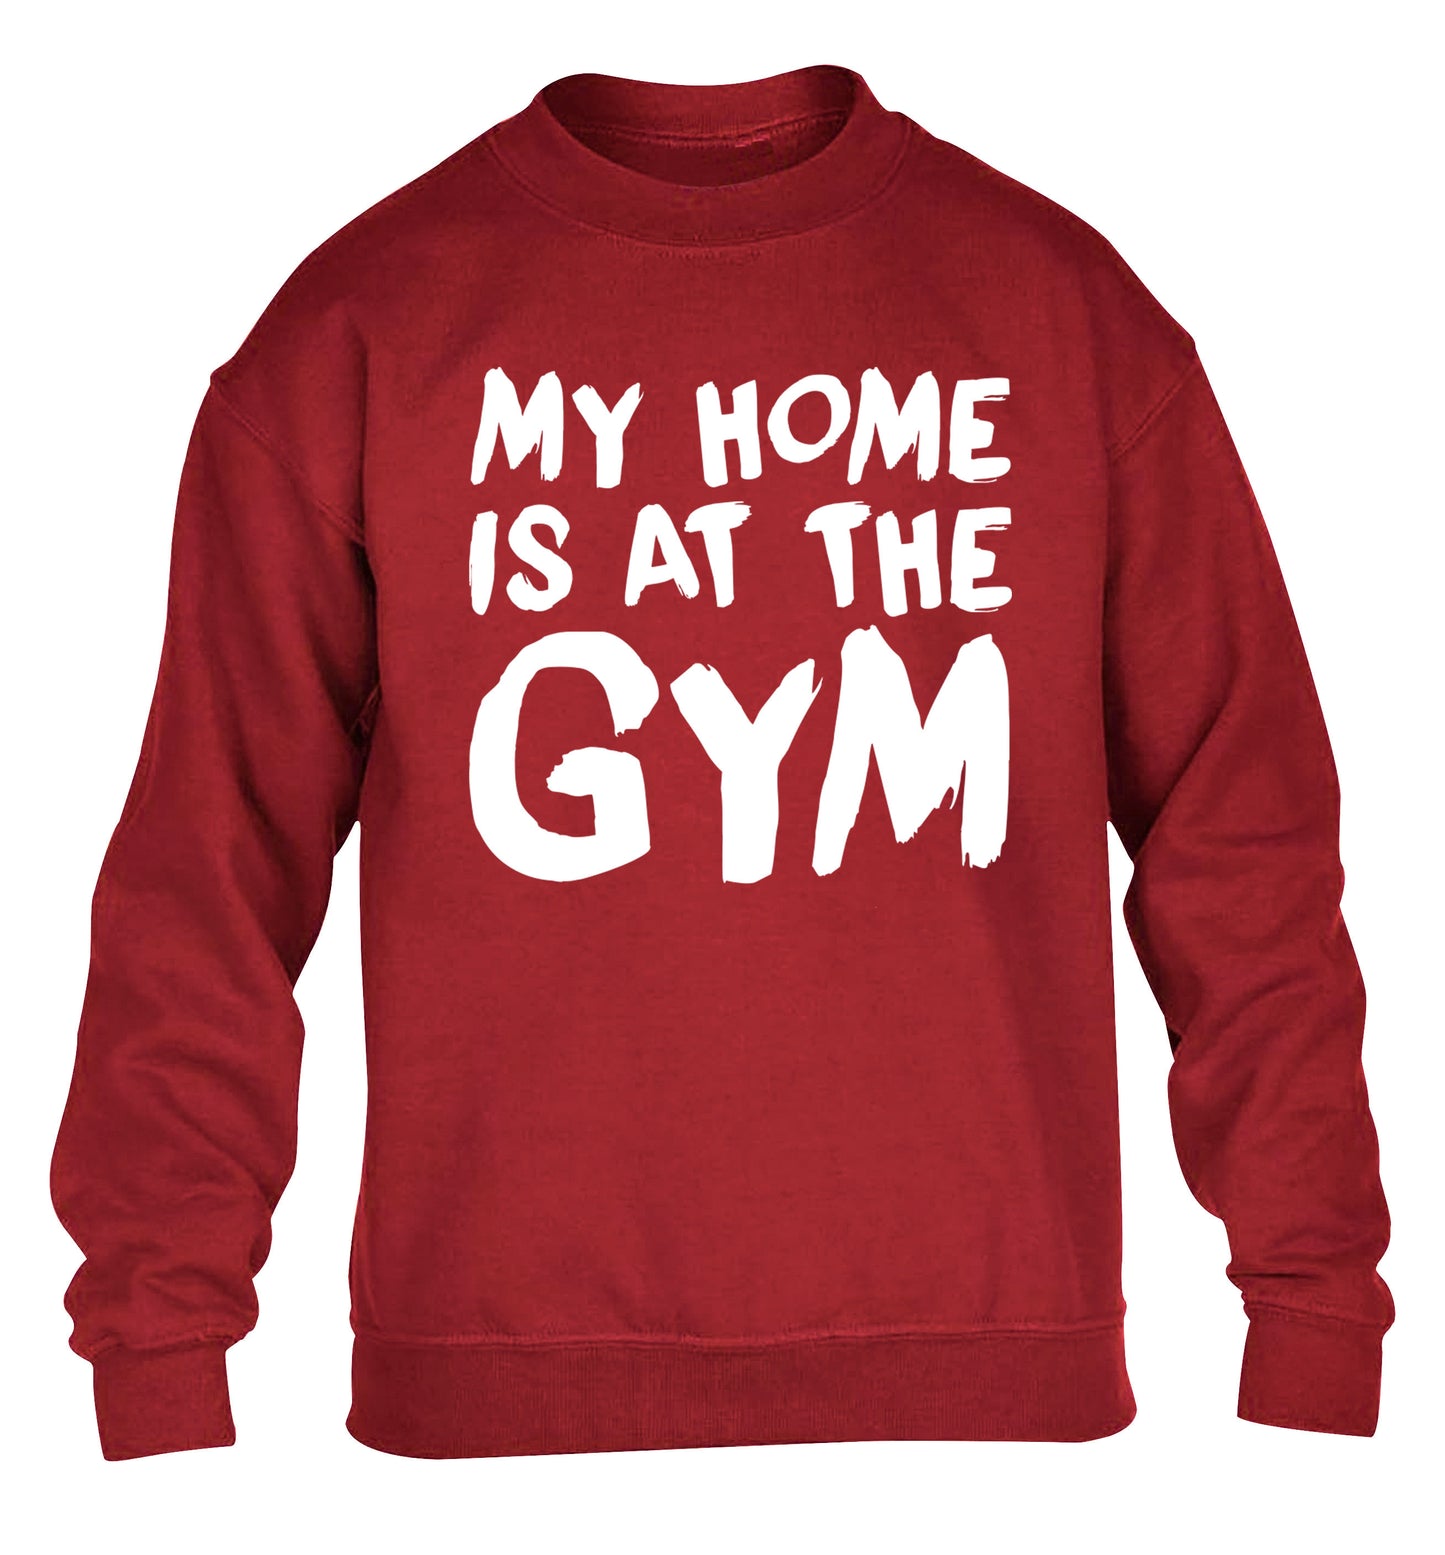 My home is at the gym children's grey sweater 12-14 Years